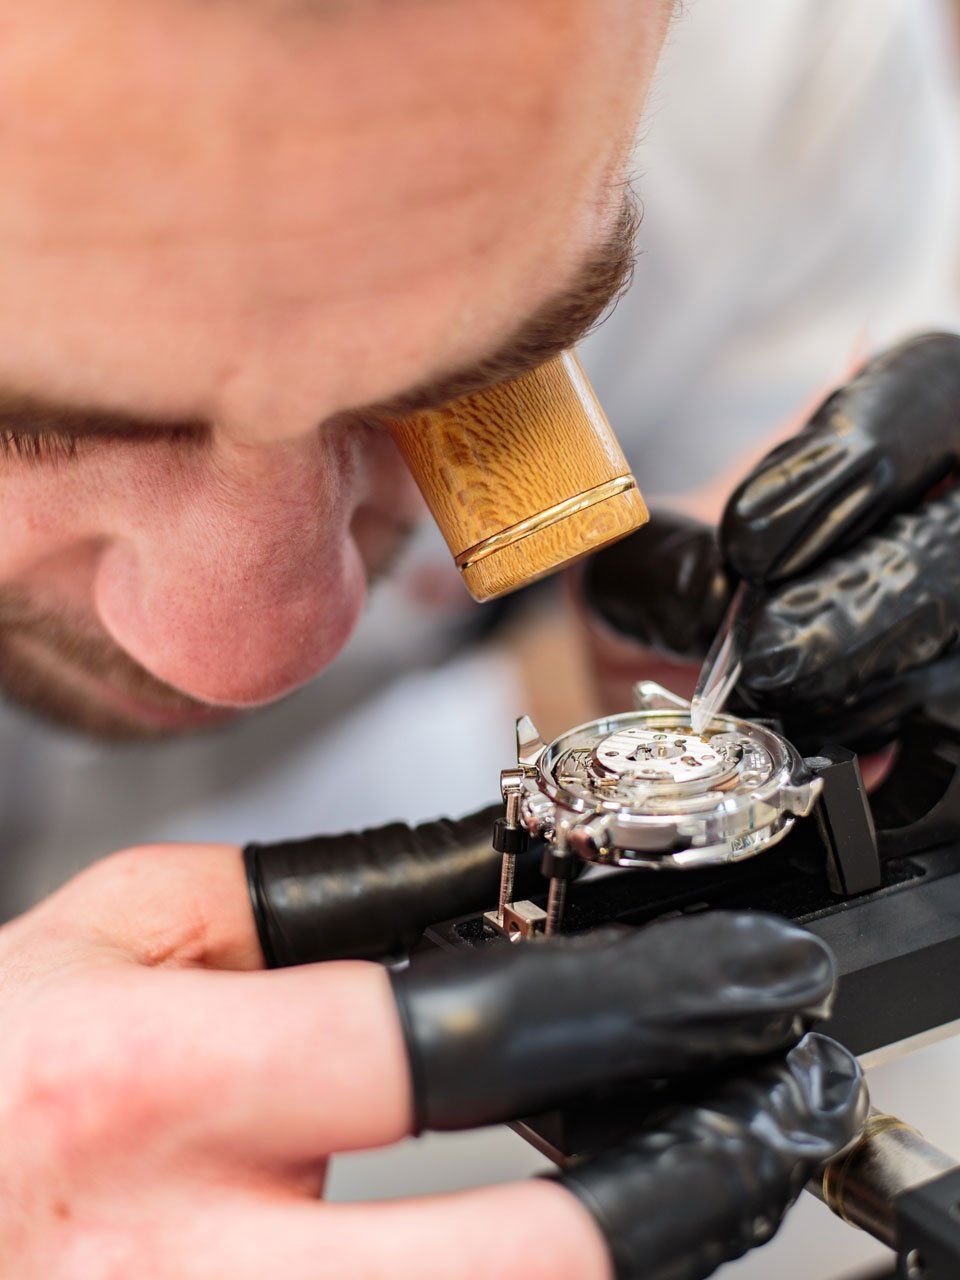 man closely looking at the watch during repair